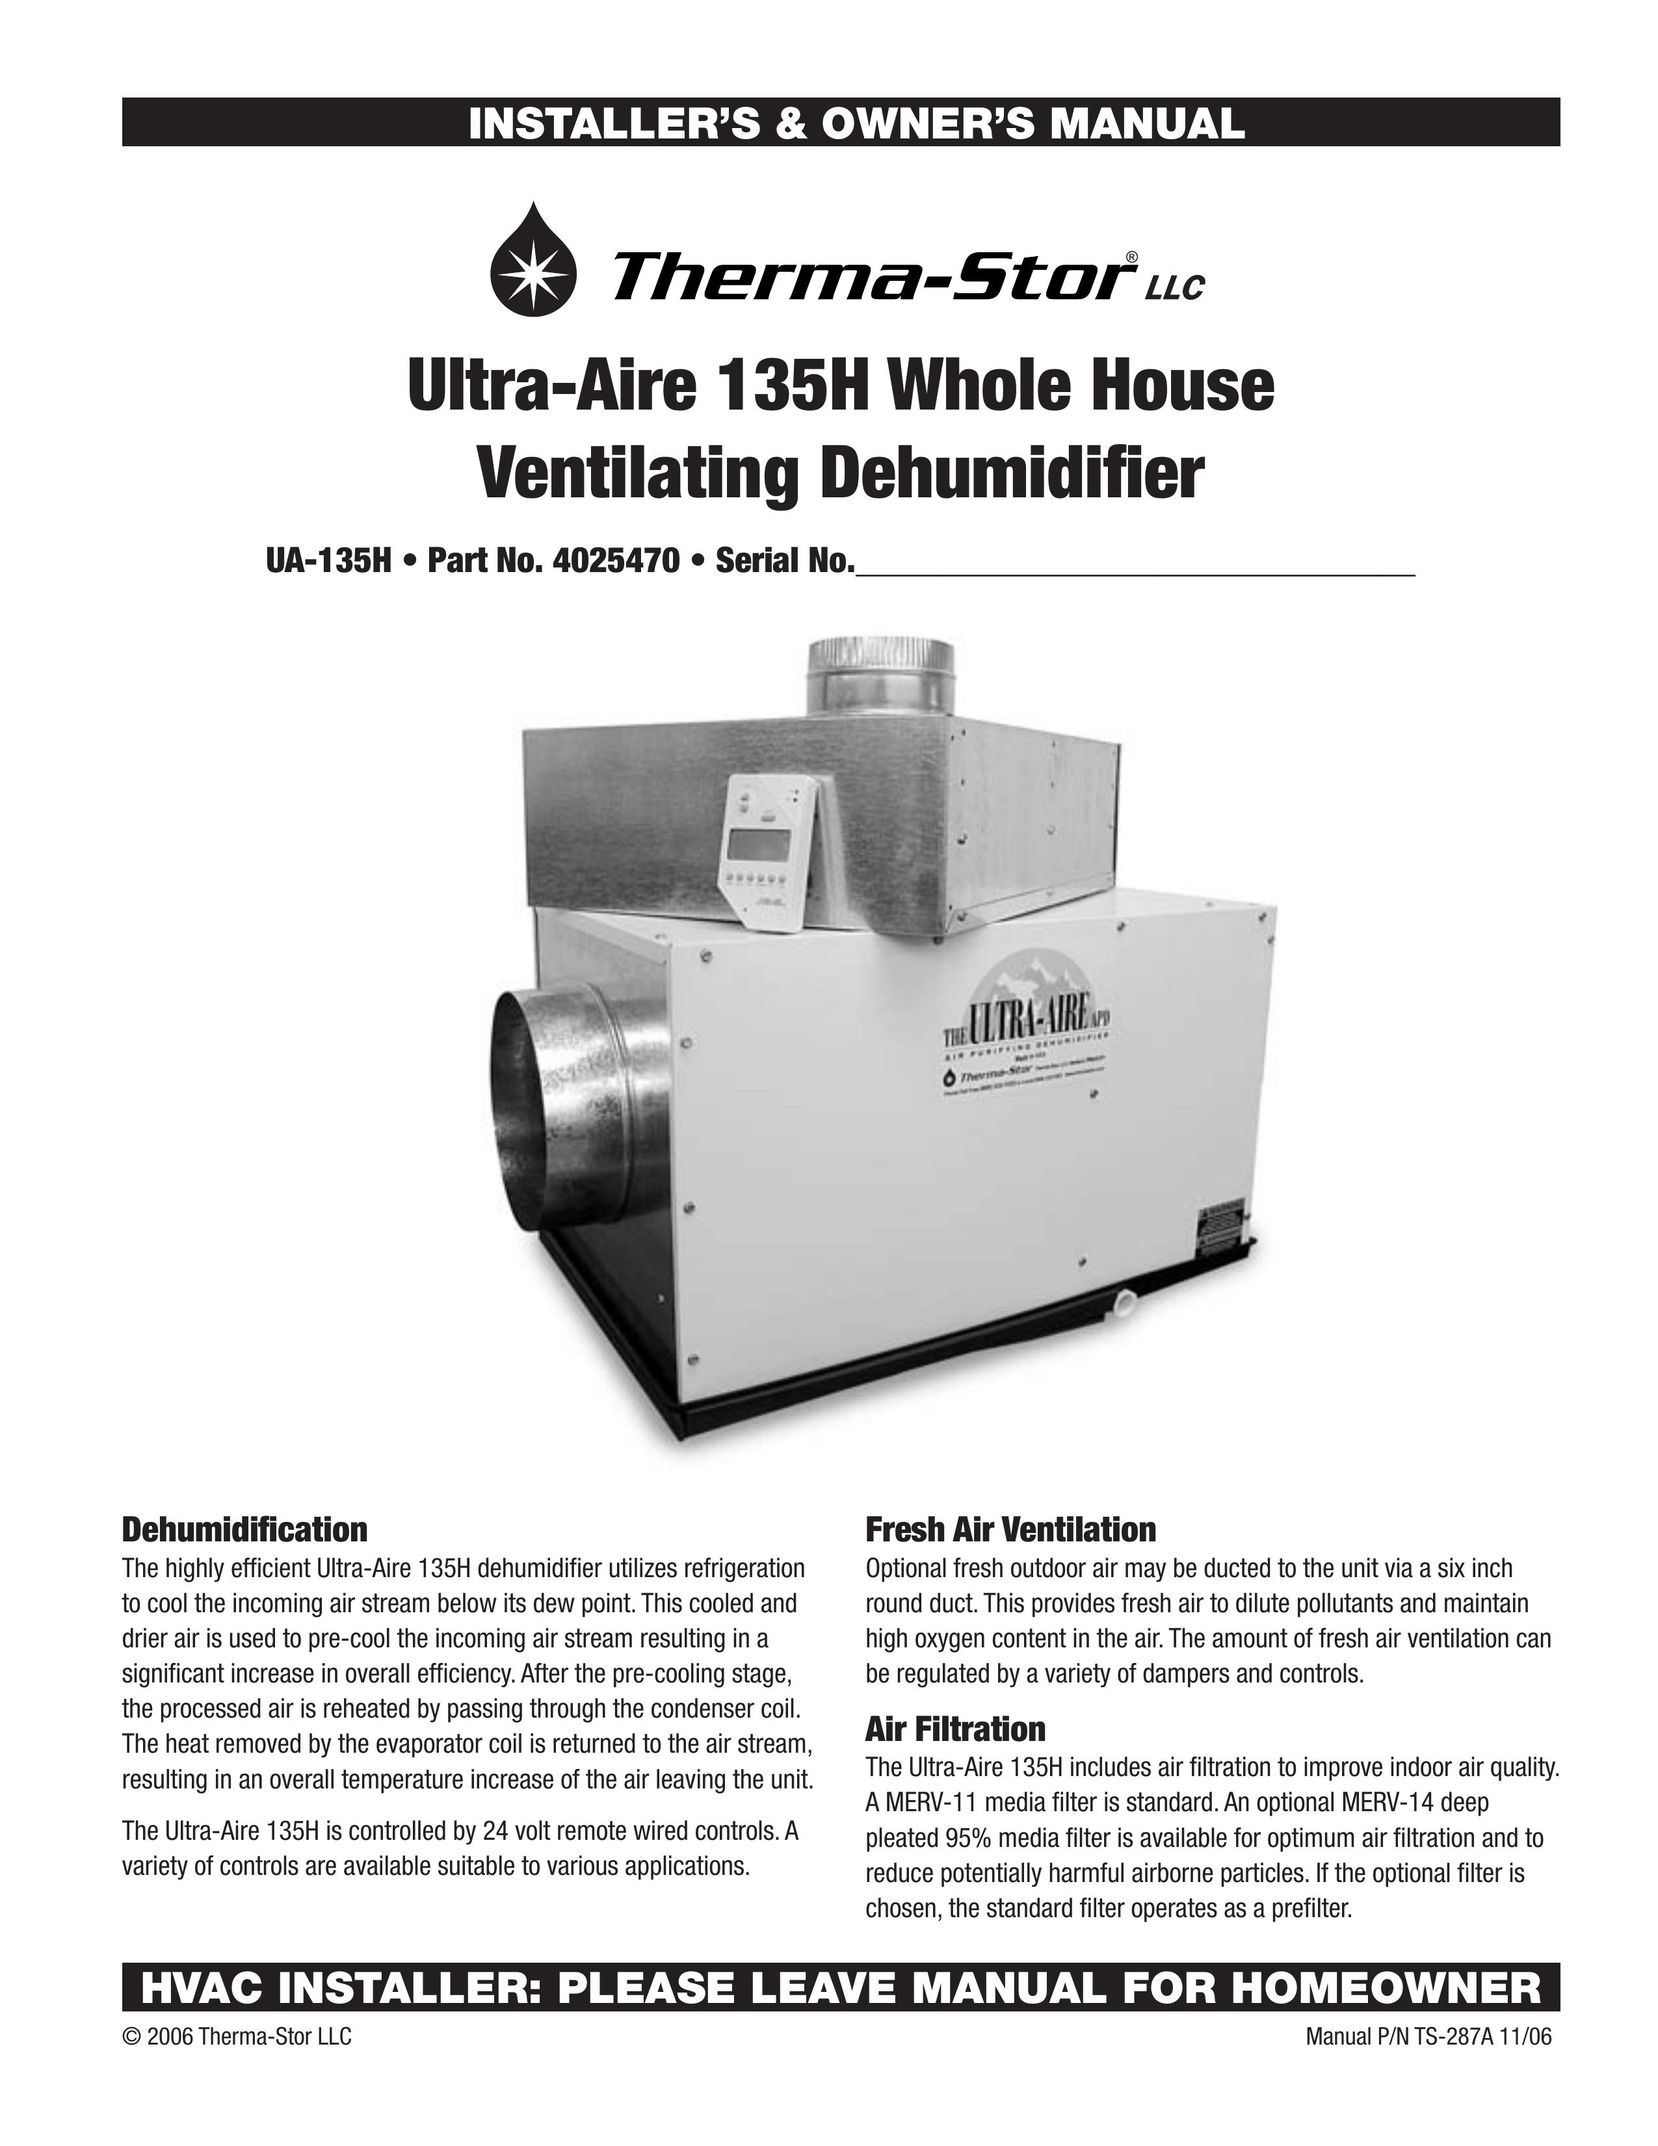 Therma-Stor Products Group UA-135H Dehumidifier User Manual